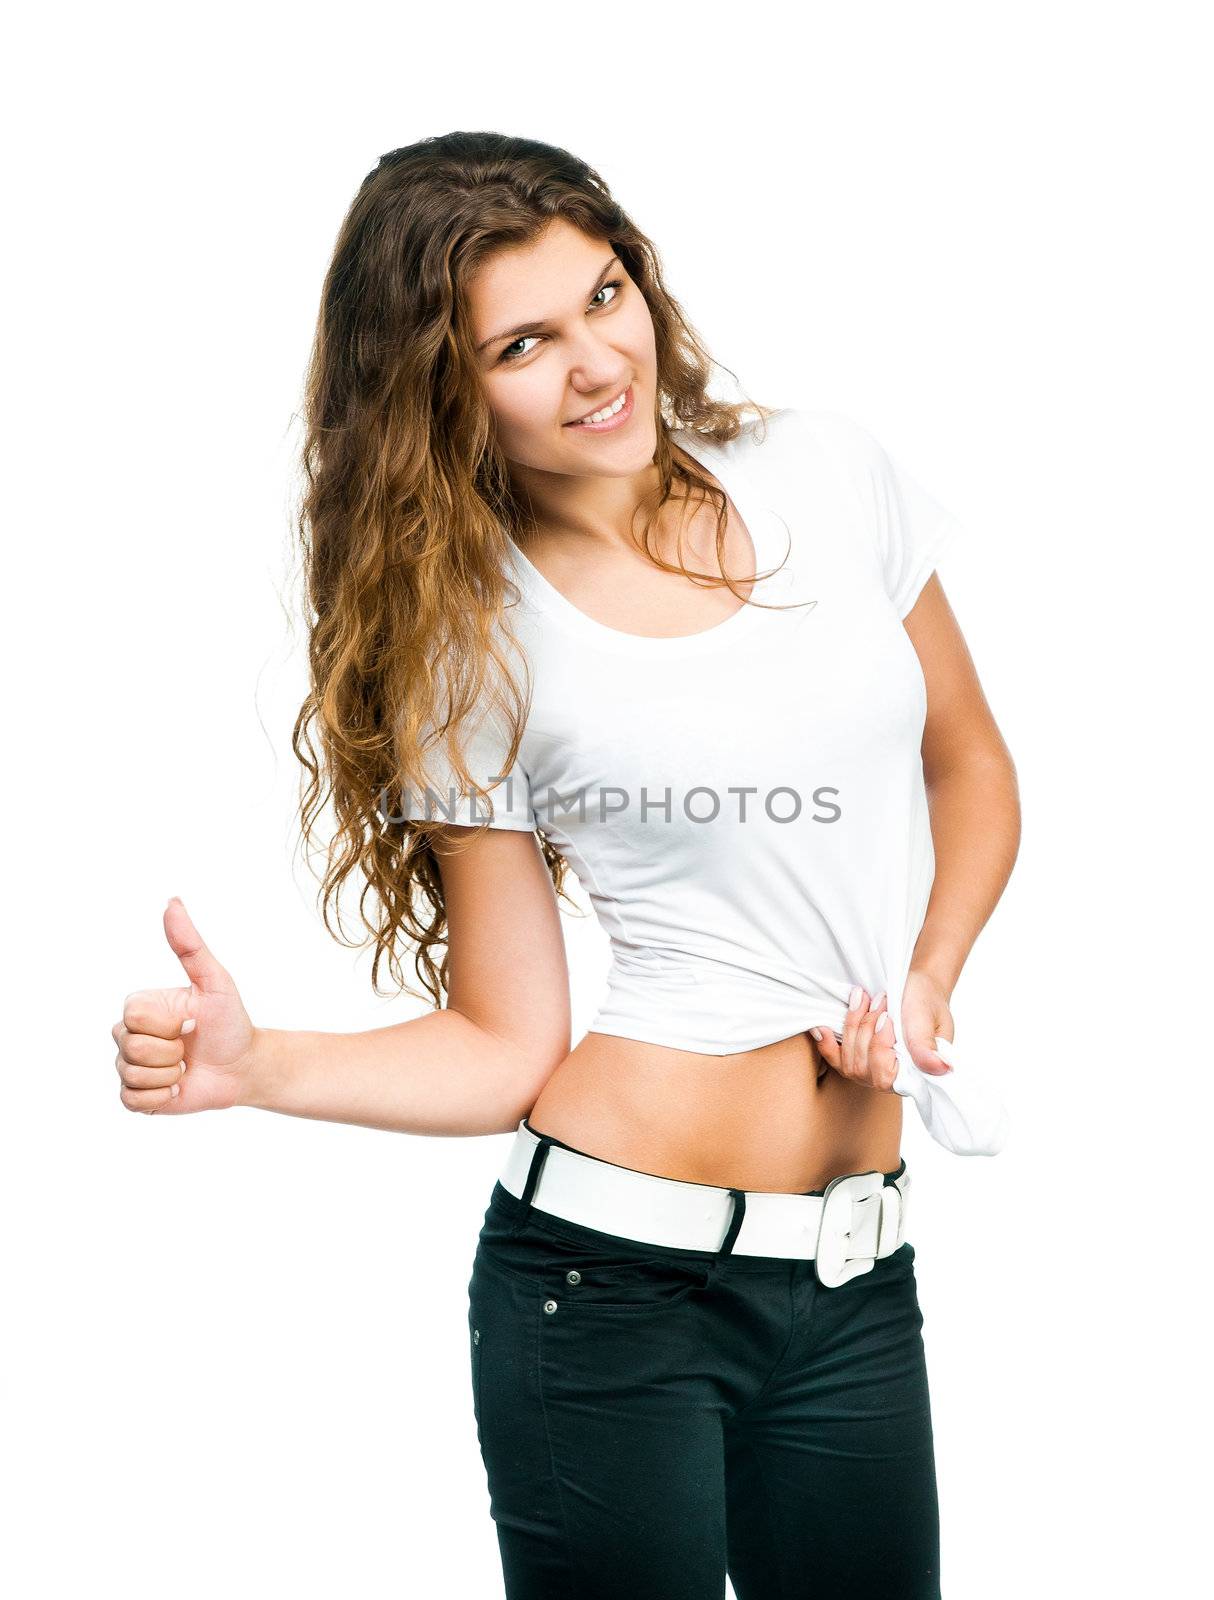 Smiling beautiful women posing with blank white shirts. Ready for your design